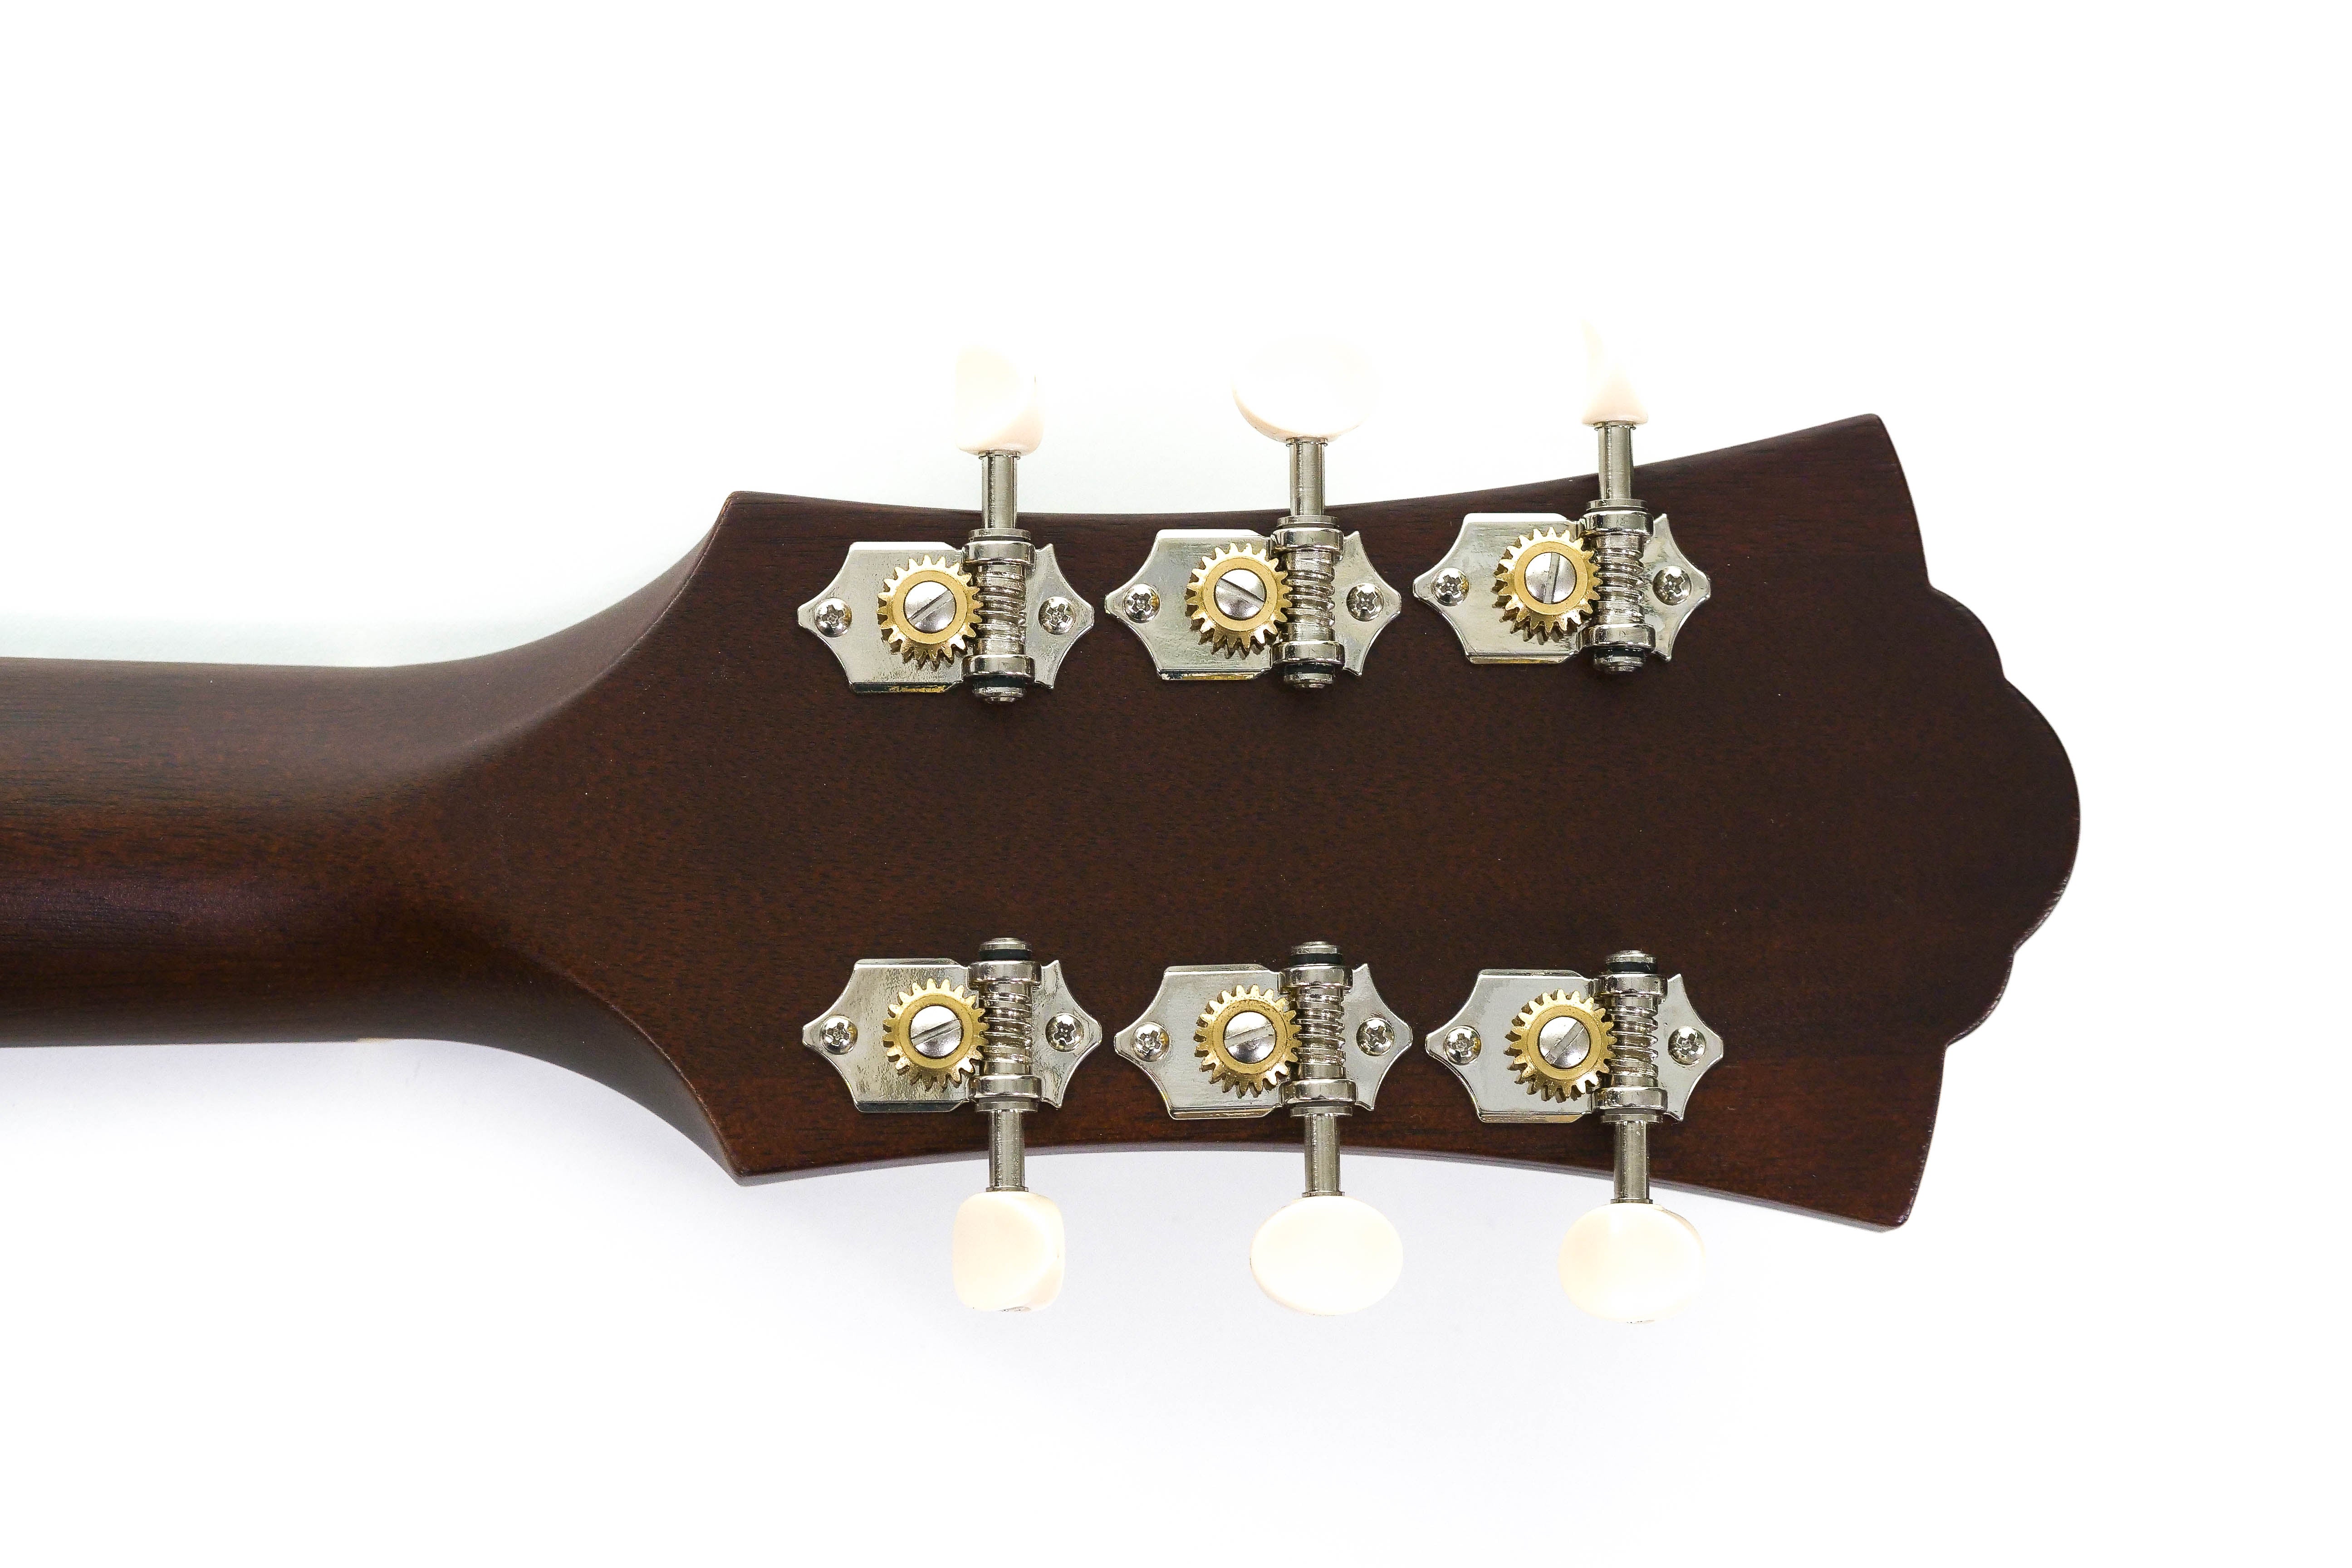 tuners on back of headstock